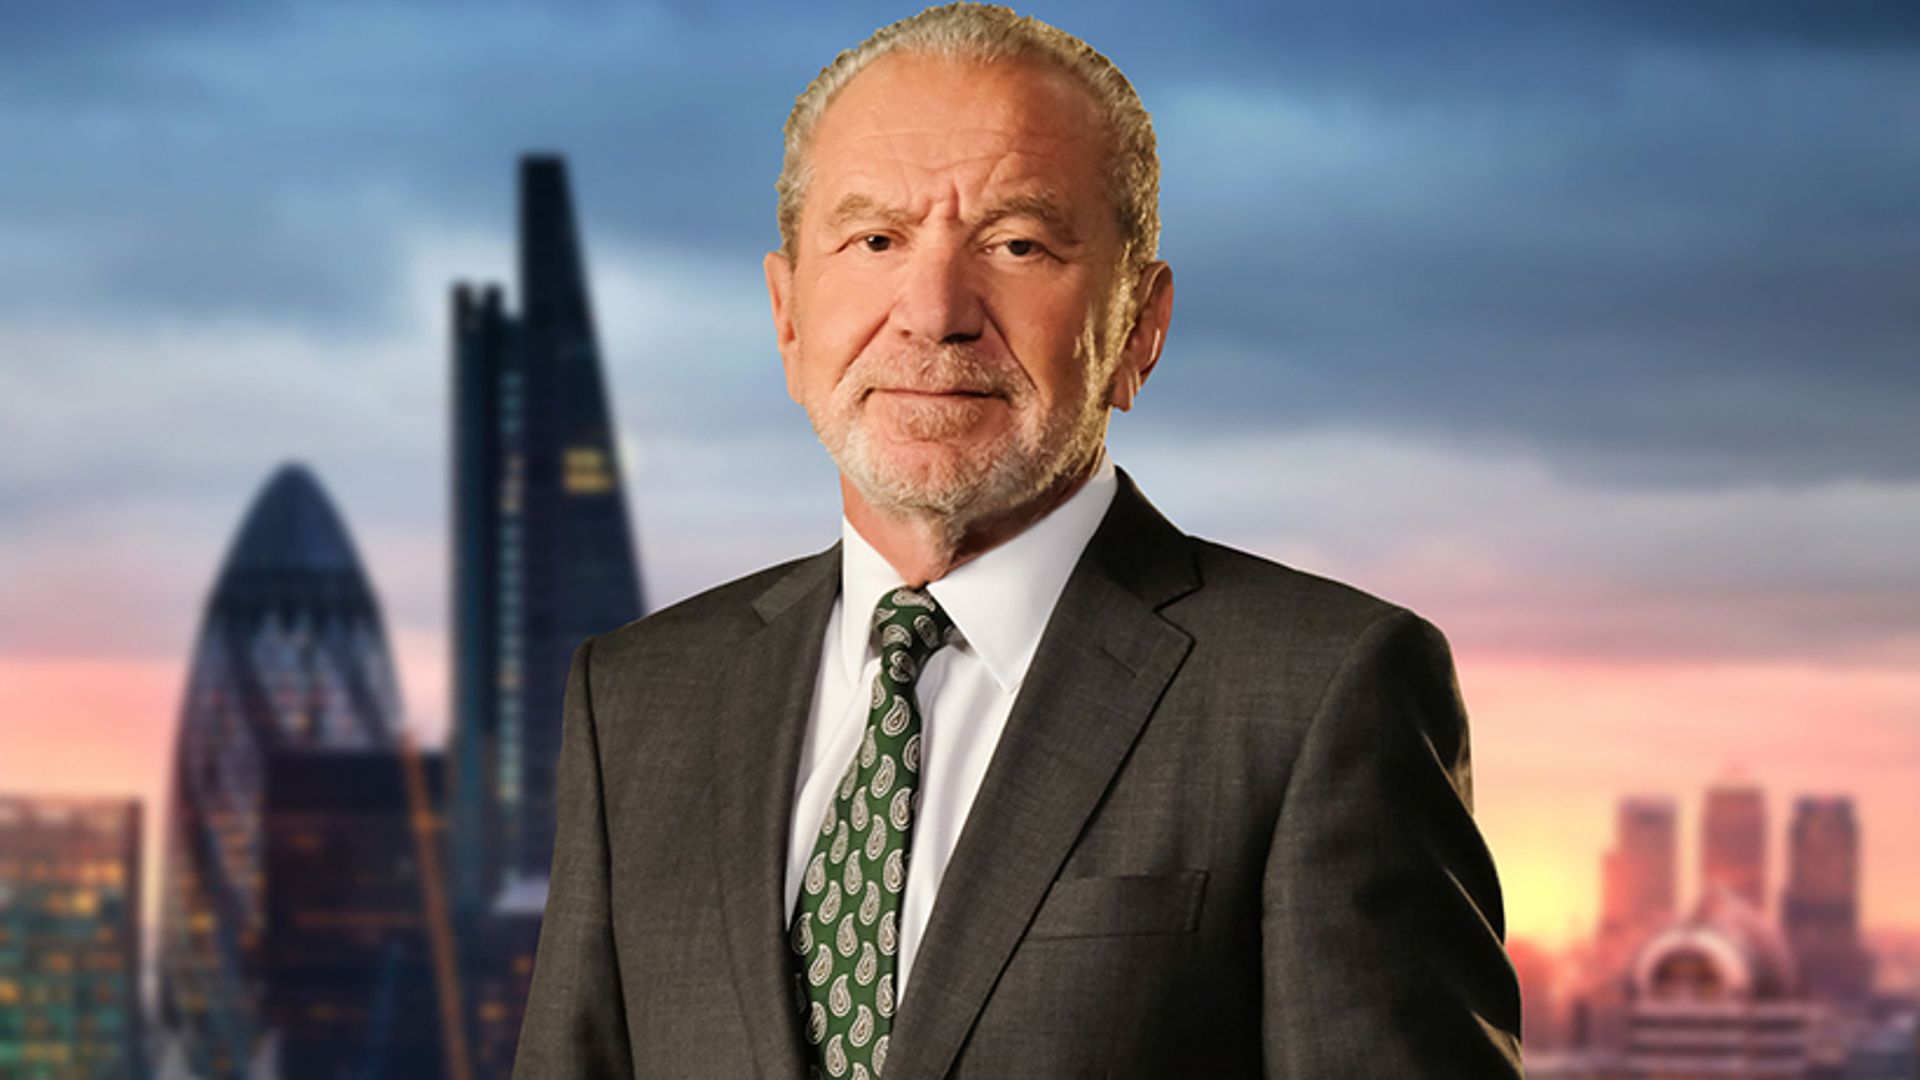 Lord Sugar boldly claims he launched Piers Morgan's TV career